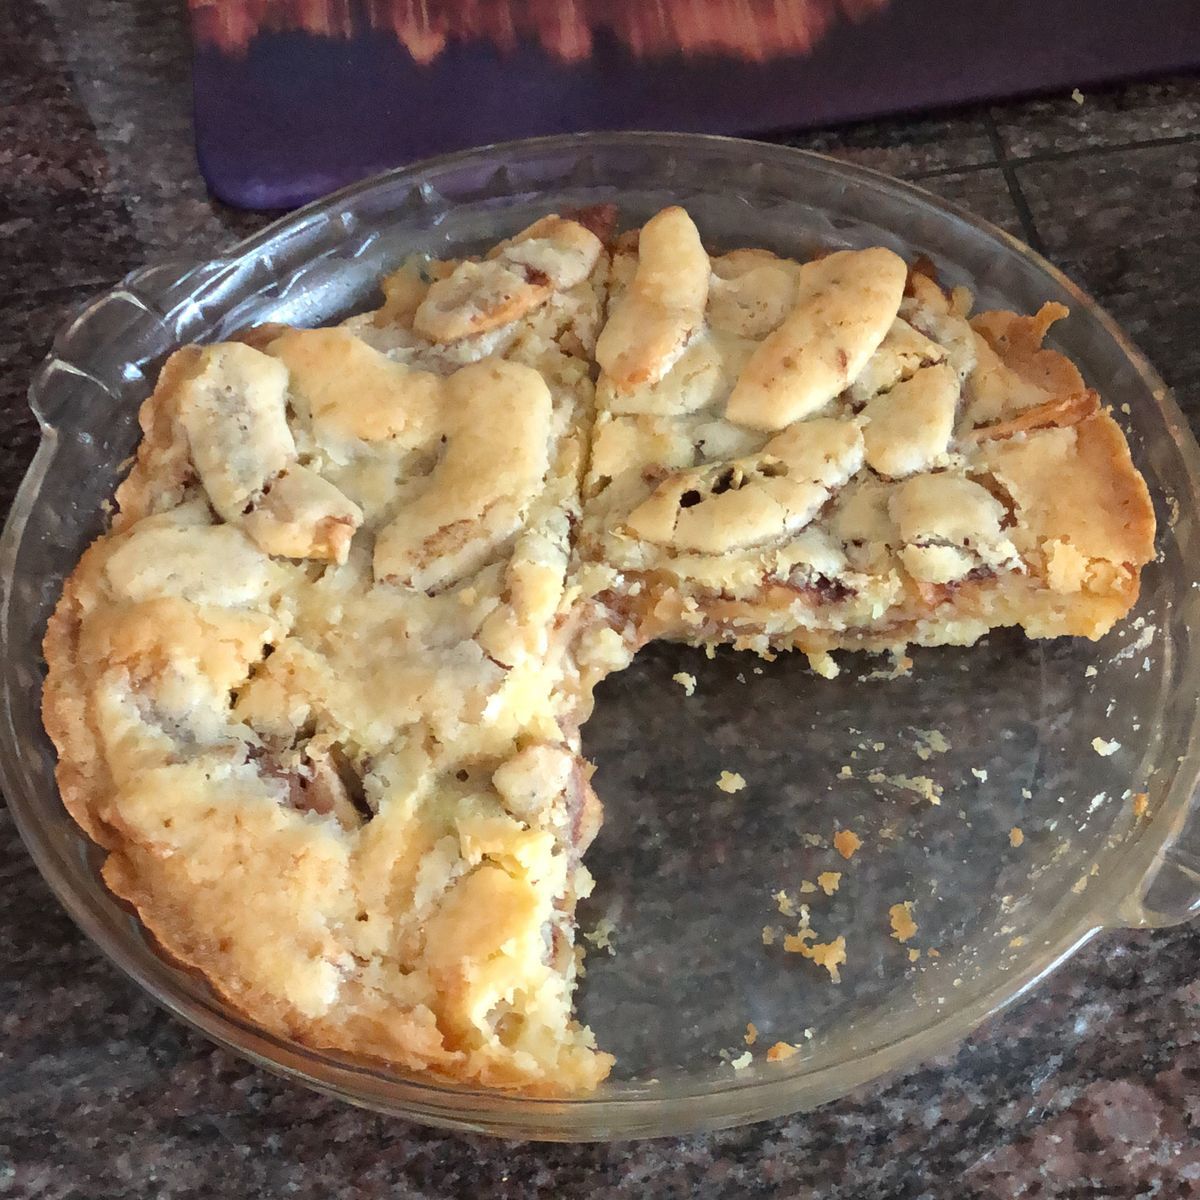 SWEDISH APPLE PIE – THE EASIEST PIE YOU’LL EVER MAKE!